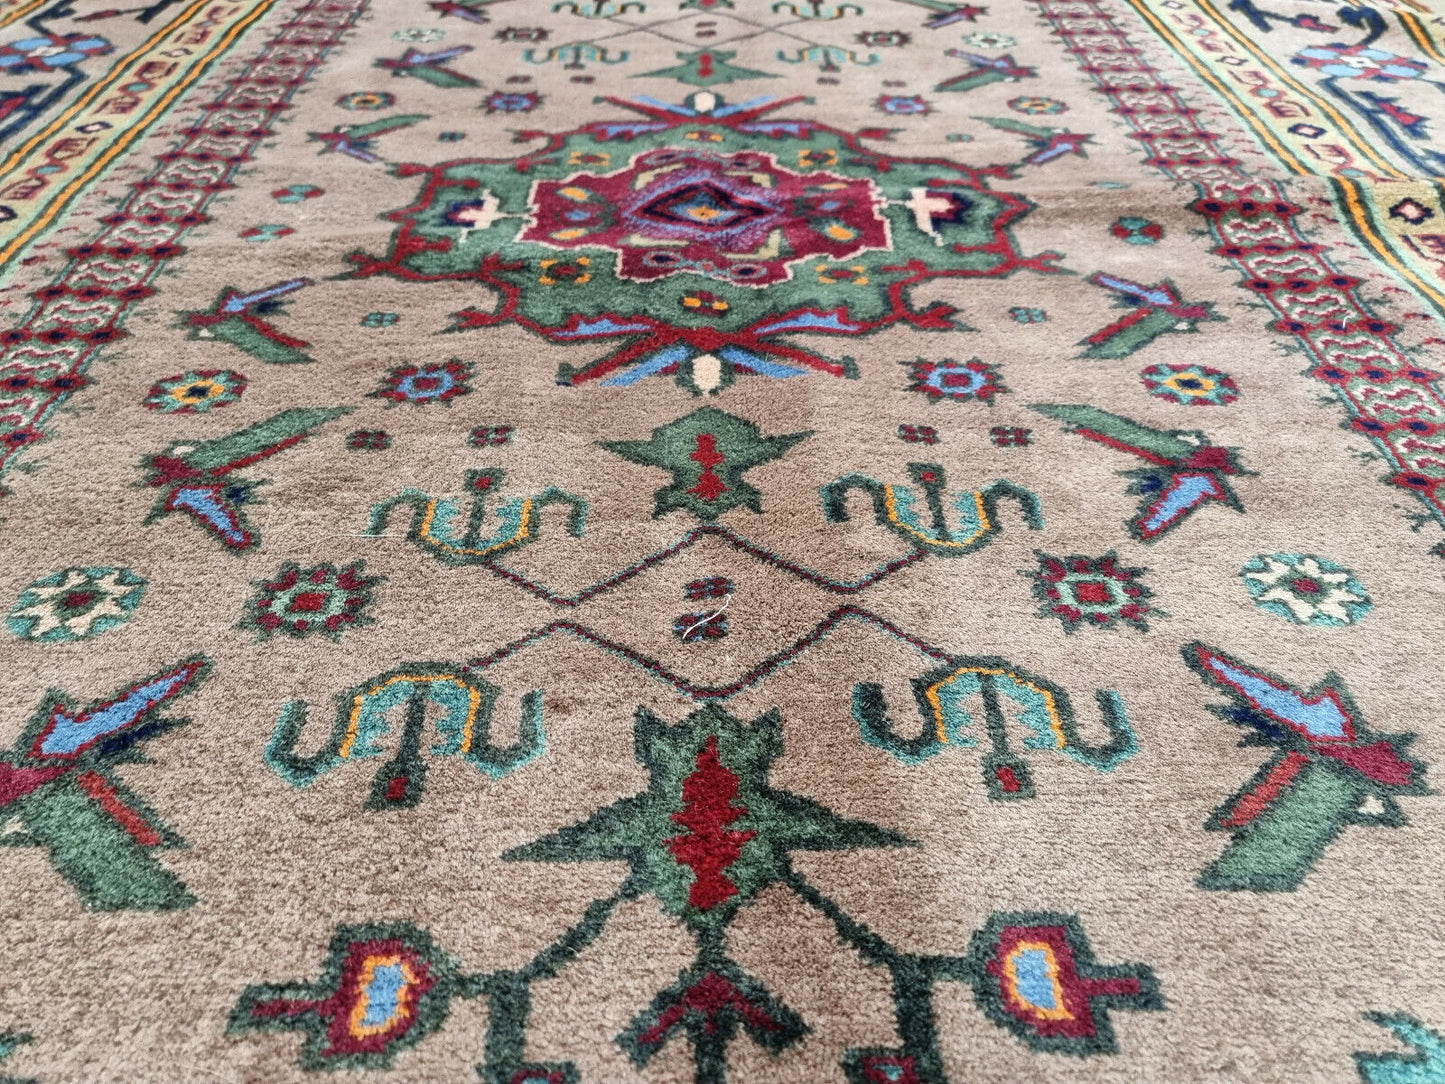 Close-up of complex pattern on Handmade Vintage Caucasian Shirvan Rug - Detailed view showcasing the intricate pattern with various shapes and symbols.